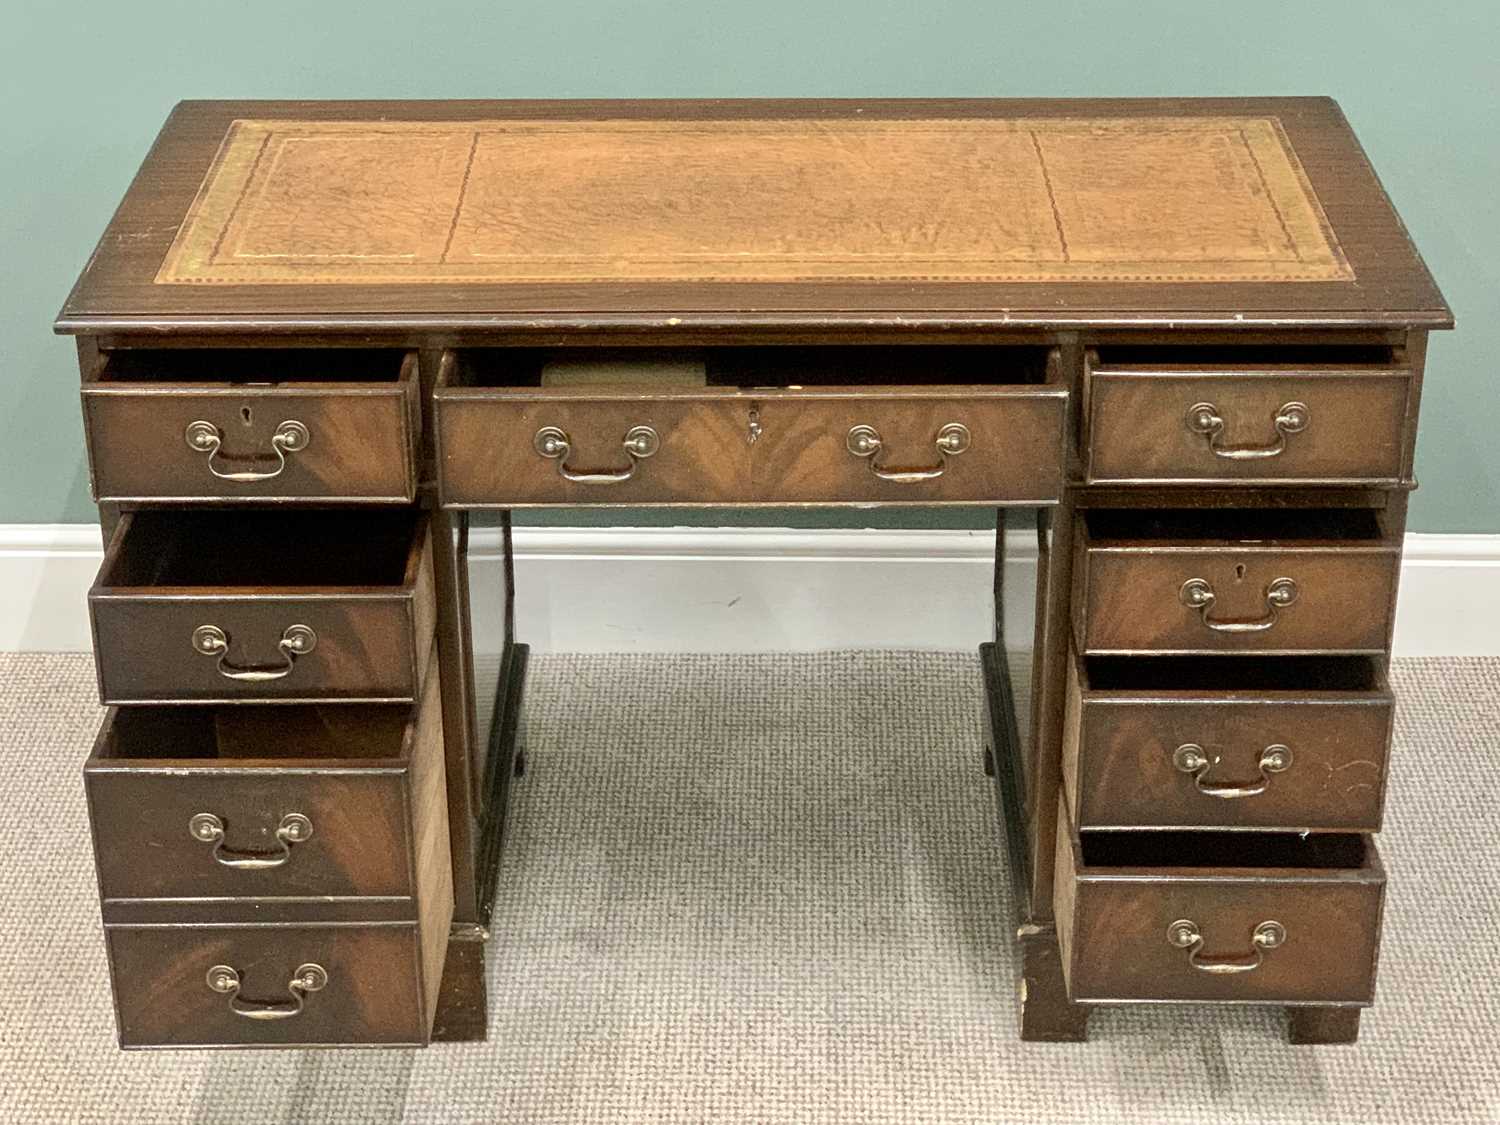 REPRODUCTION MAHOGANY TWIN PEDESTAL DESK - having eight opening drawers with swan neck handles, on - Image 4 of 4